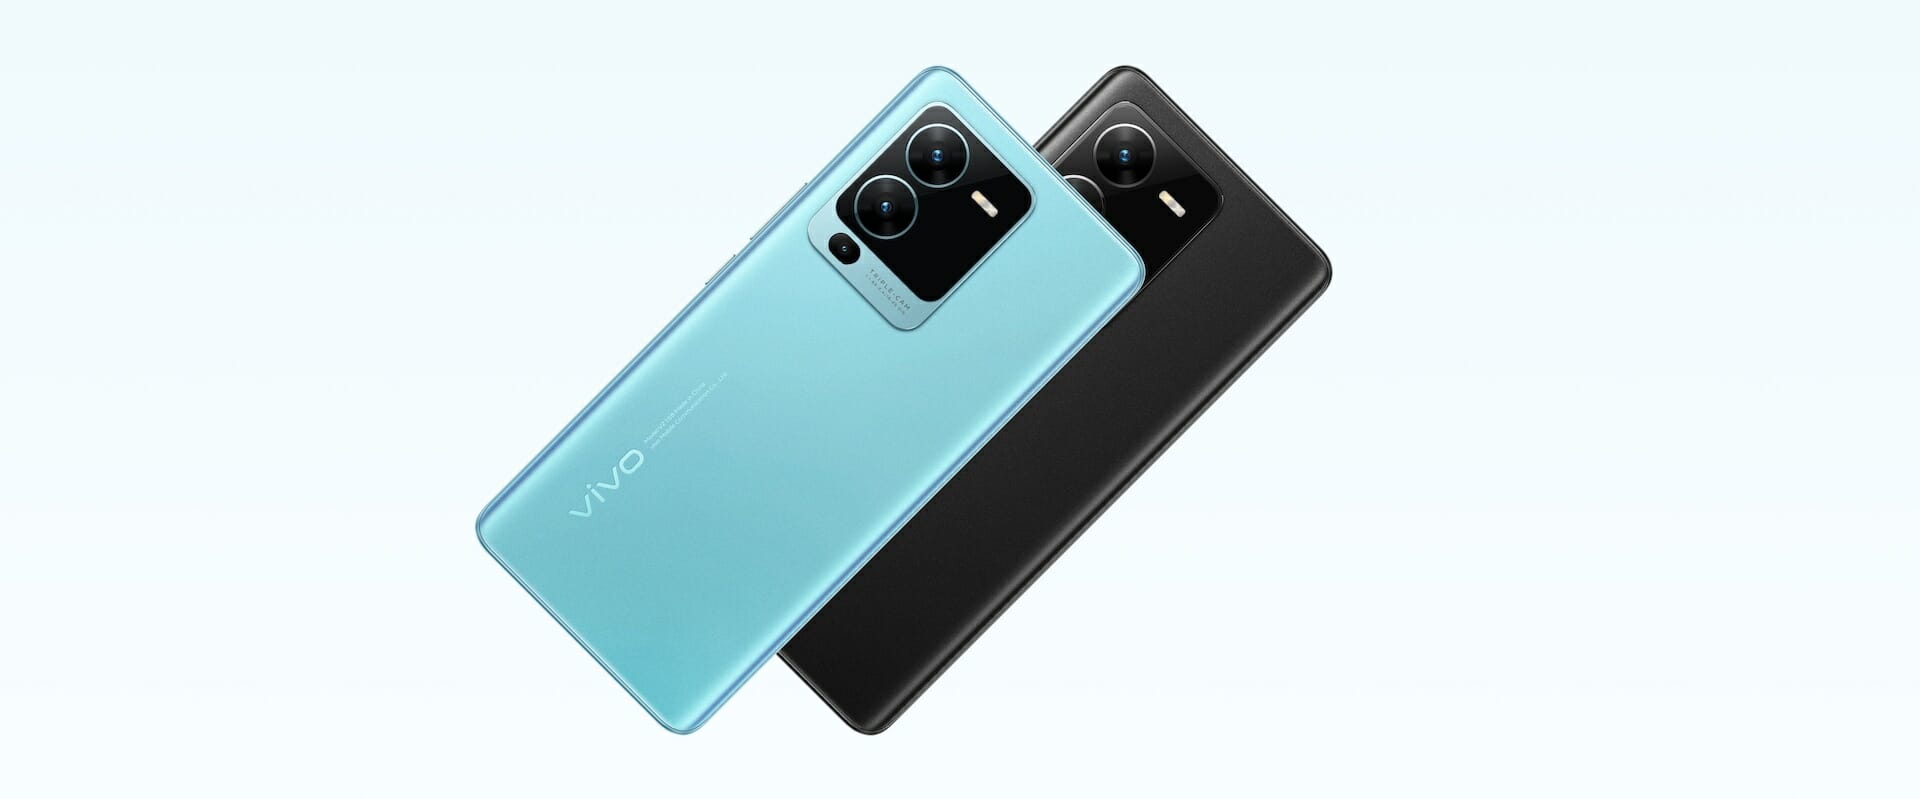 Vivo V25 Pro is presented - a new smartphone that changes color under the influence of sunlight